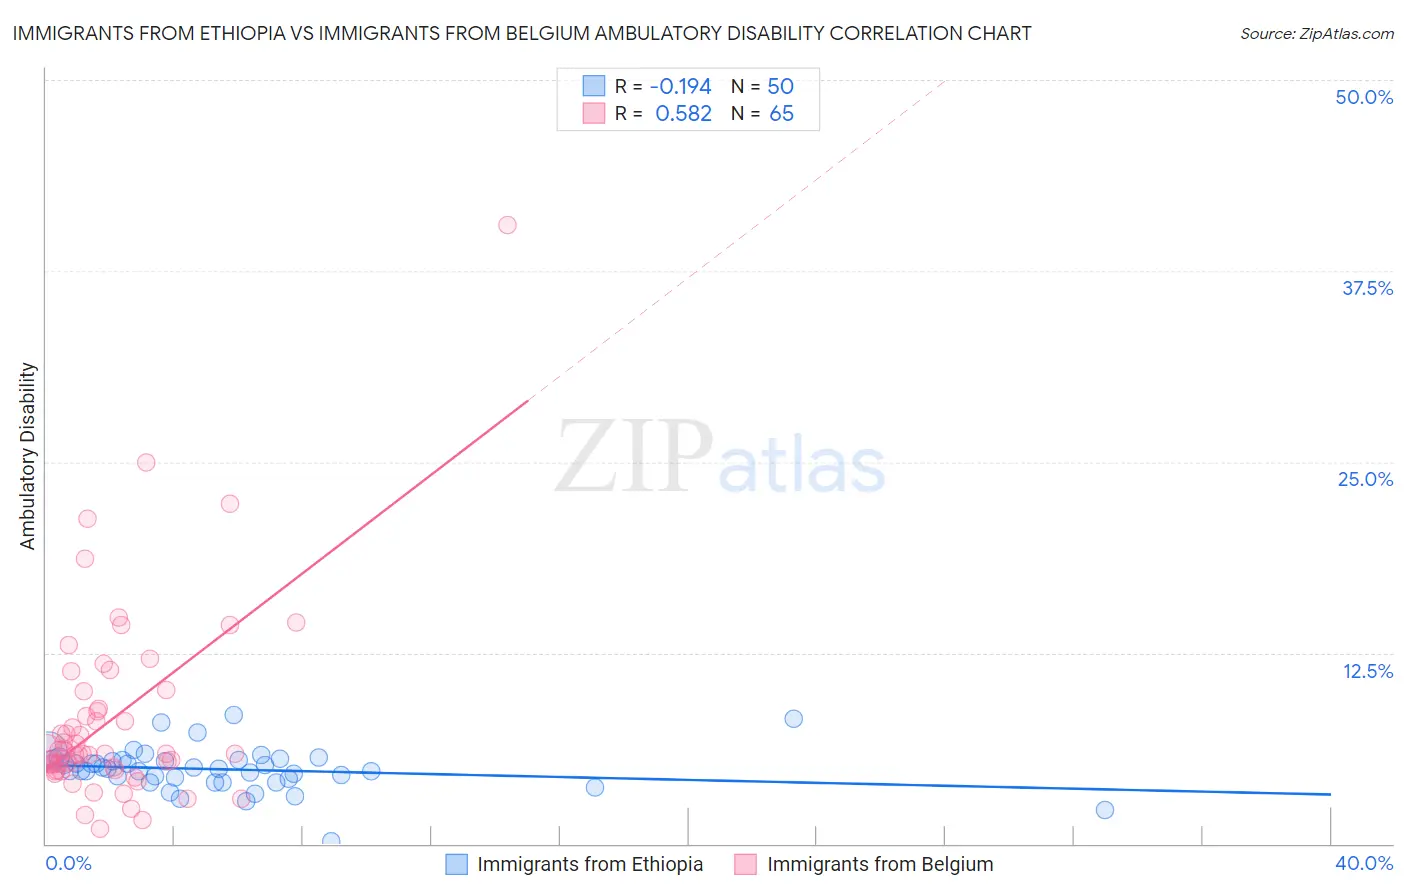 Immigrants from Ethiopia vs Immigrants from Belgium Ambulatory Disability